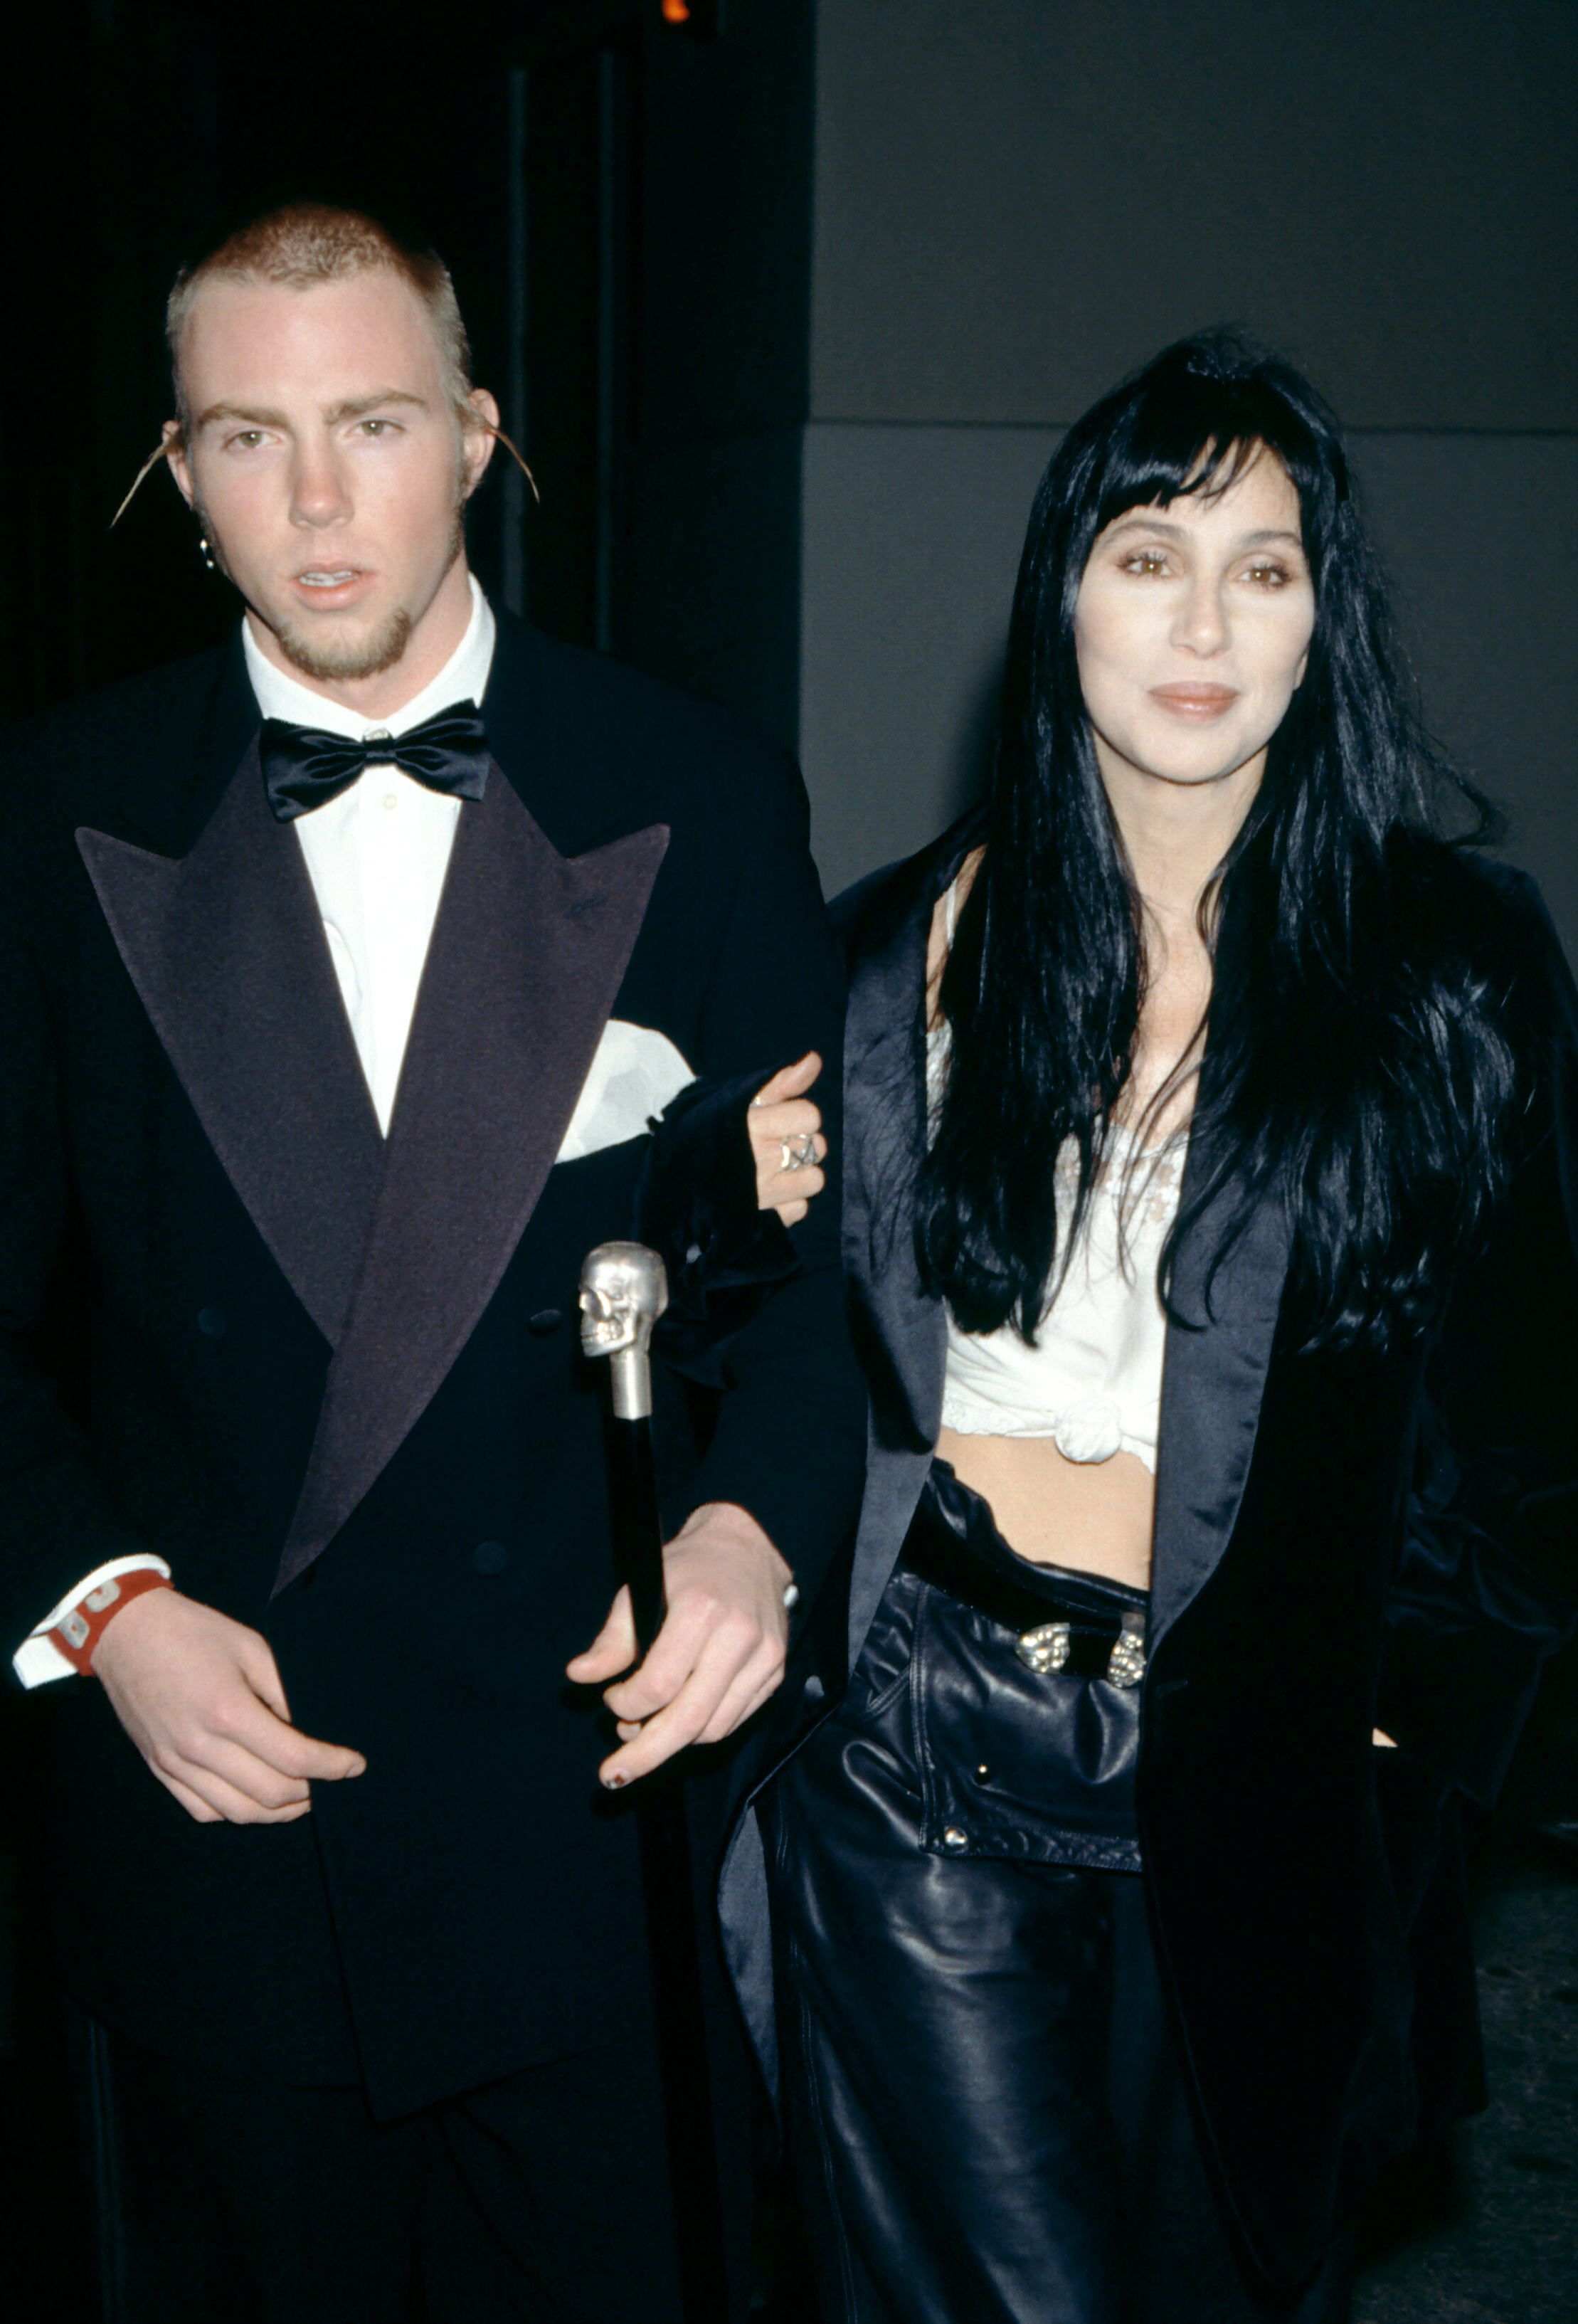 Elijah Blue Allman and his mother Cher attend the 5th Annual Fire and Ice Ball in Century City, California on December 7, 1994 | Source: Getty Images